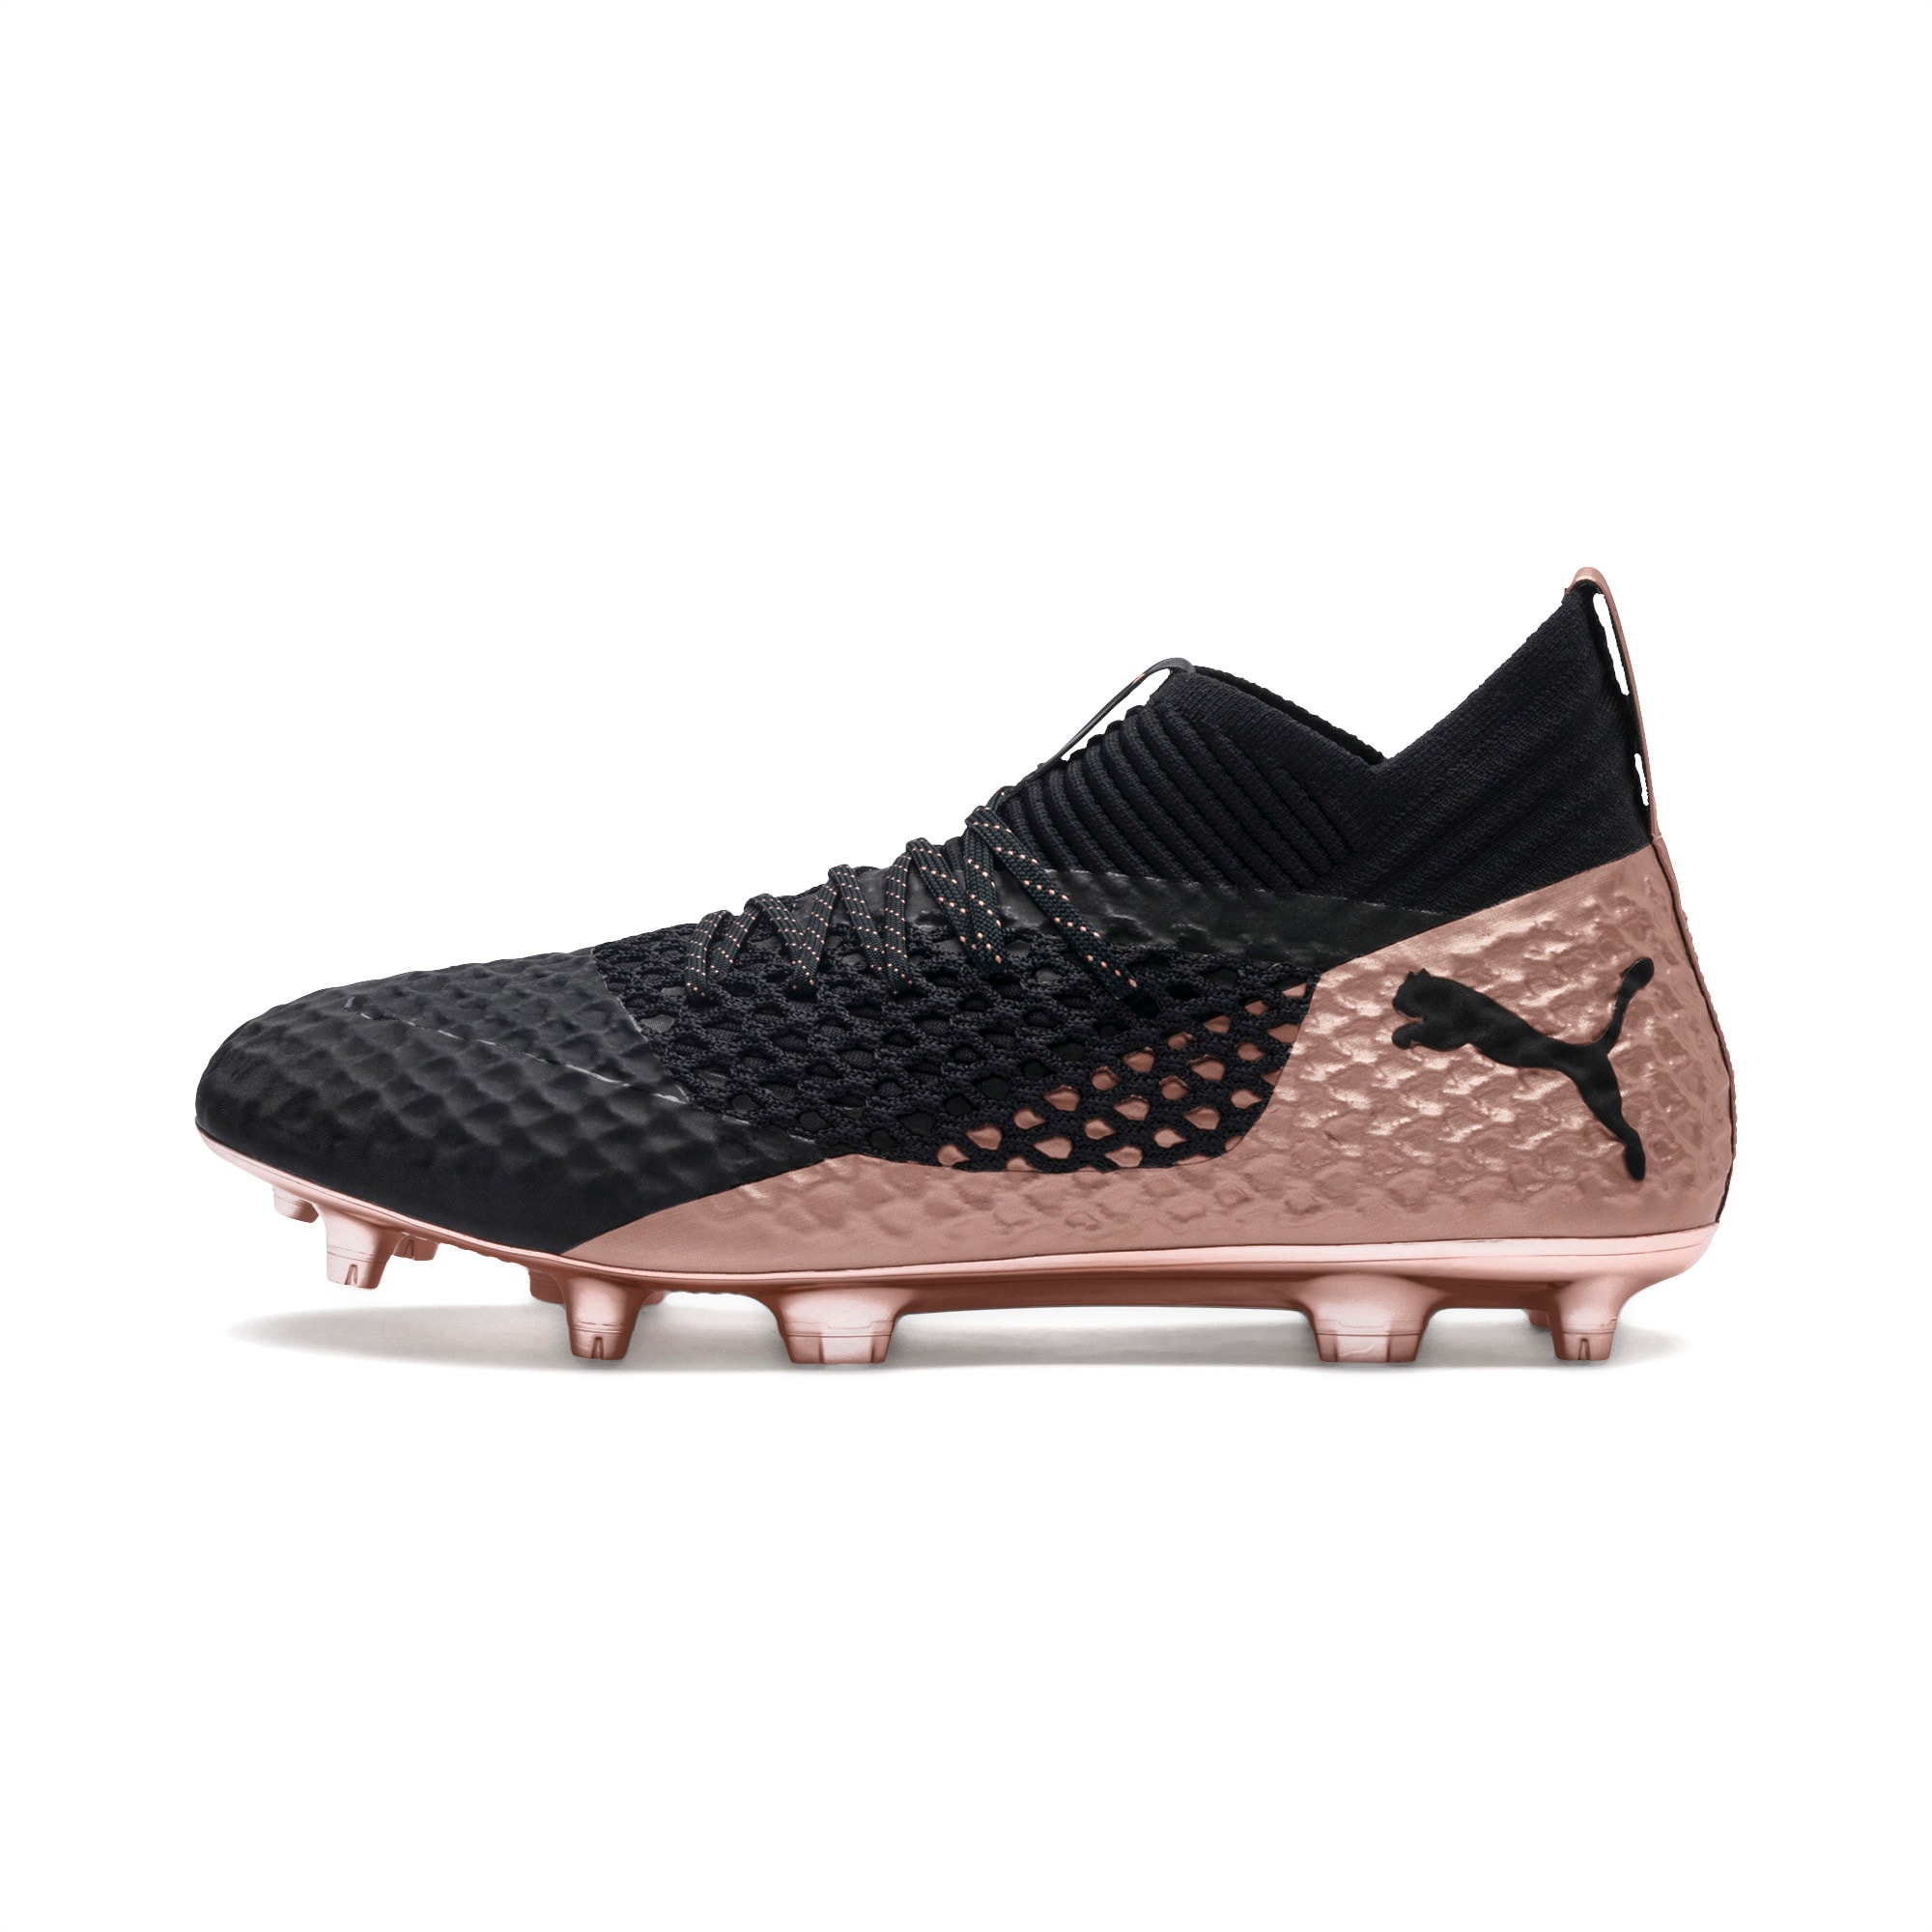 rose gold cleats